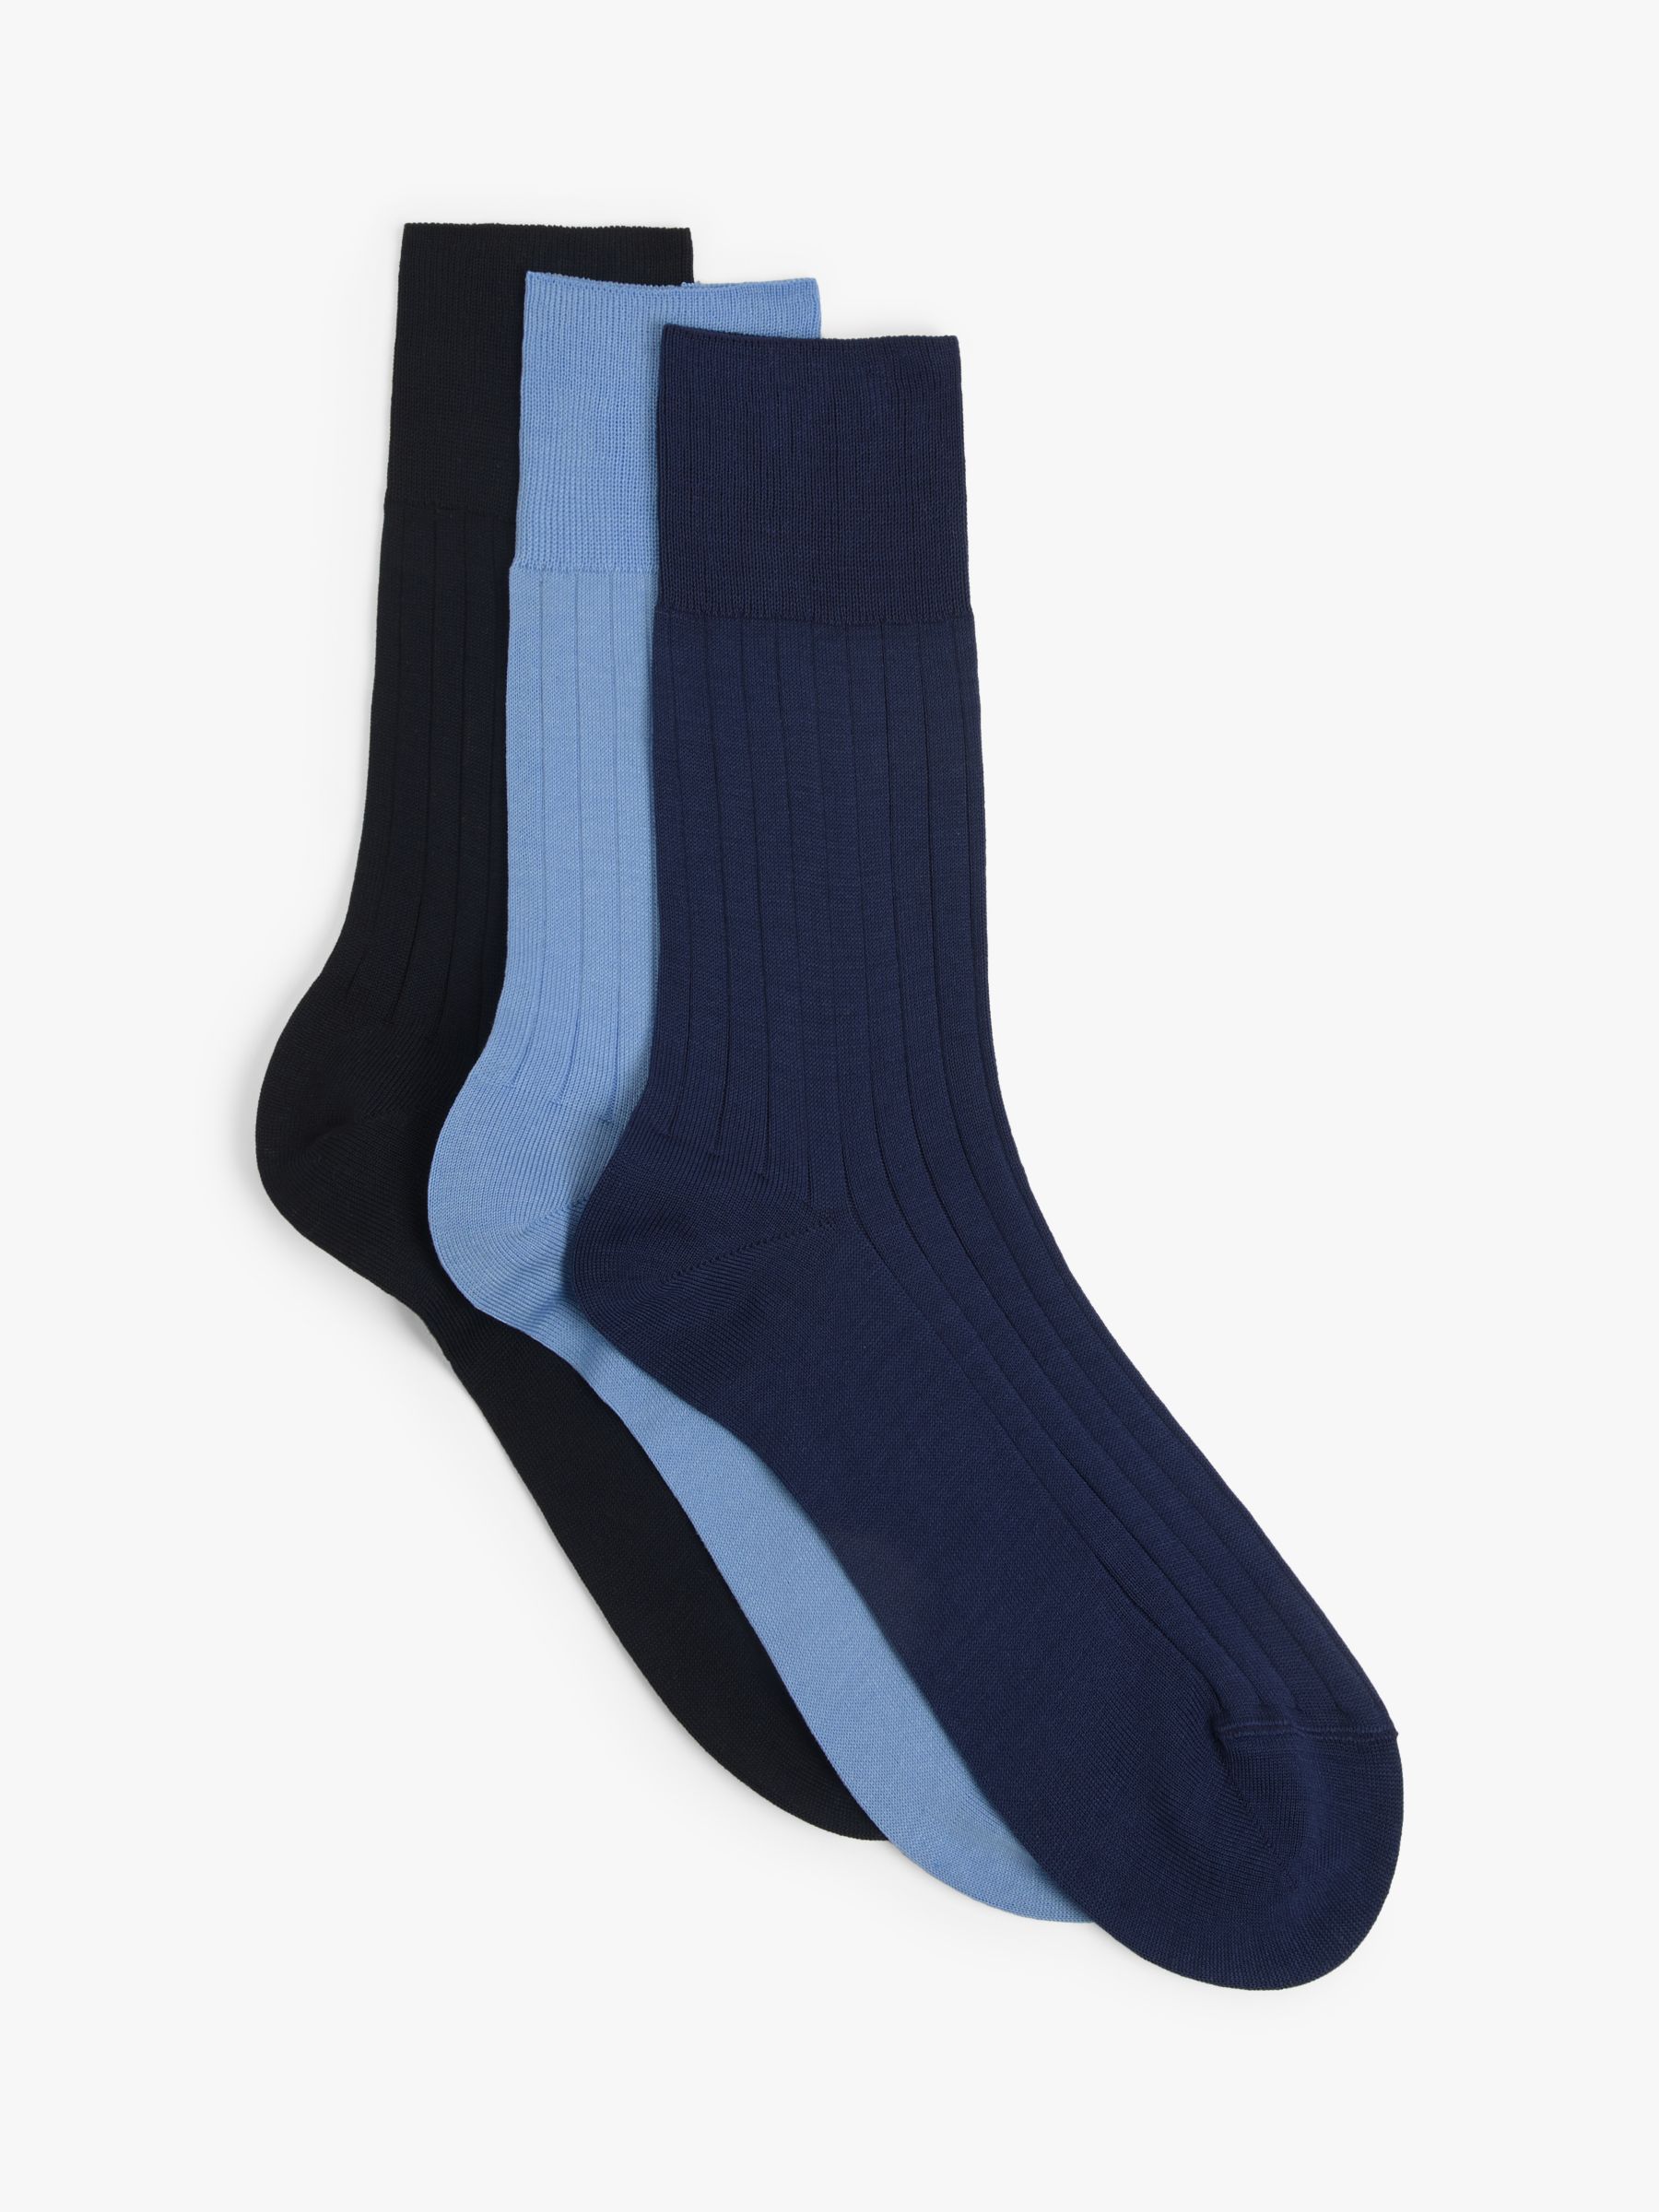 John Lewis Made in Italy Mercerised Cotton Socks, Pack of 3, Blues at ...